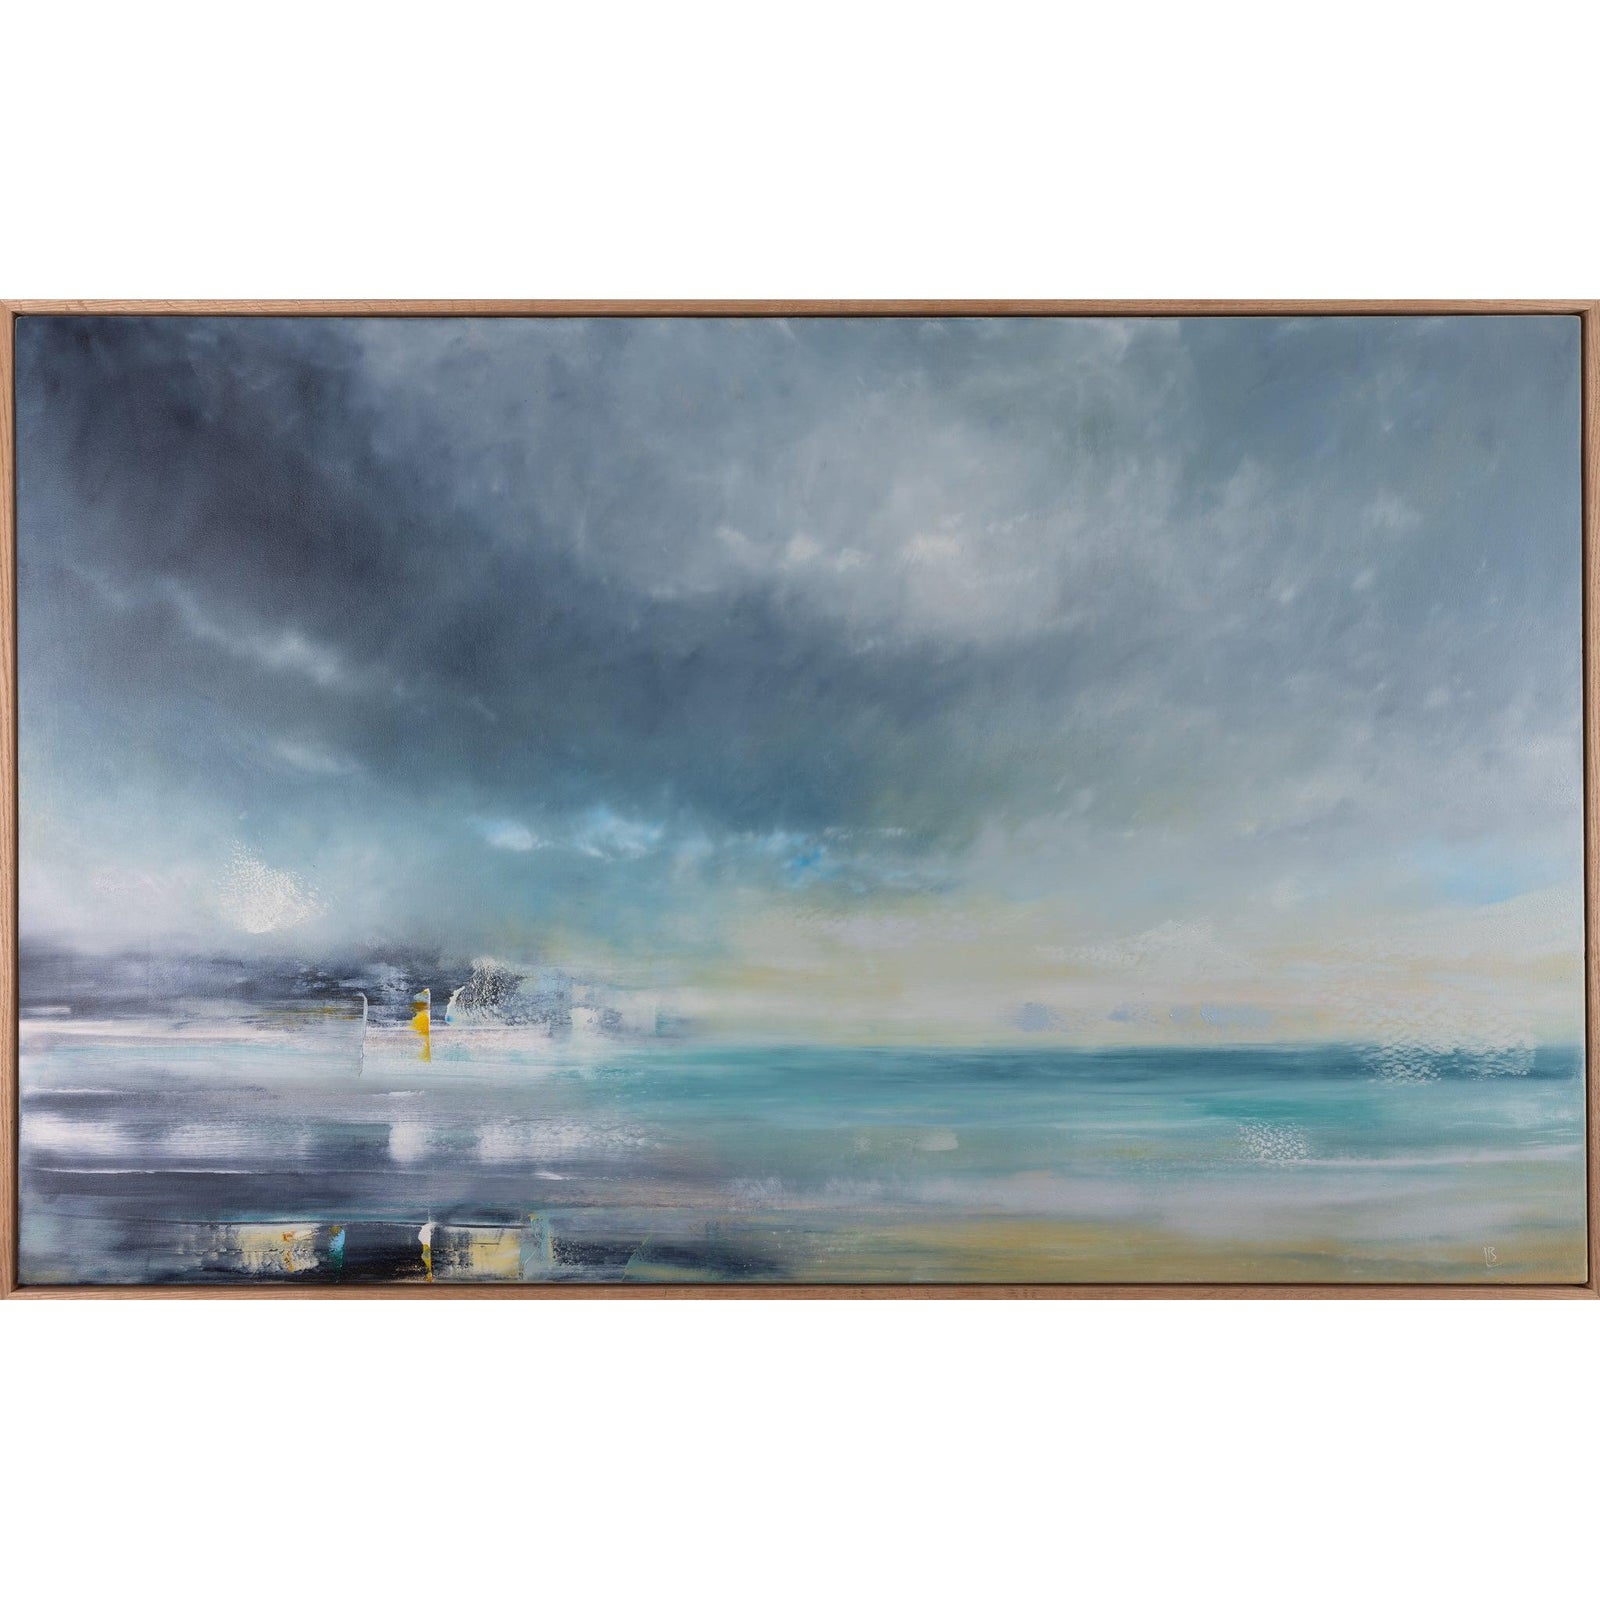 'Echoes of Light' oil on canvas by Ben Lucas, available at Padstow Gallery, Cornwall